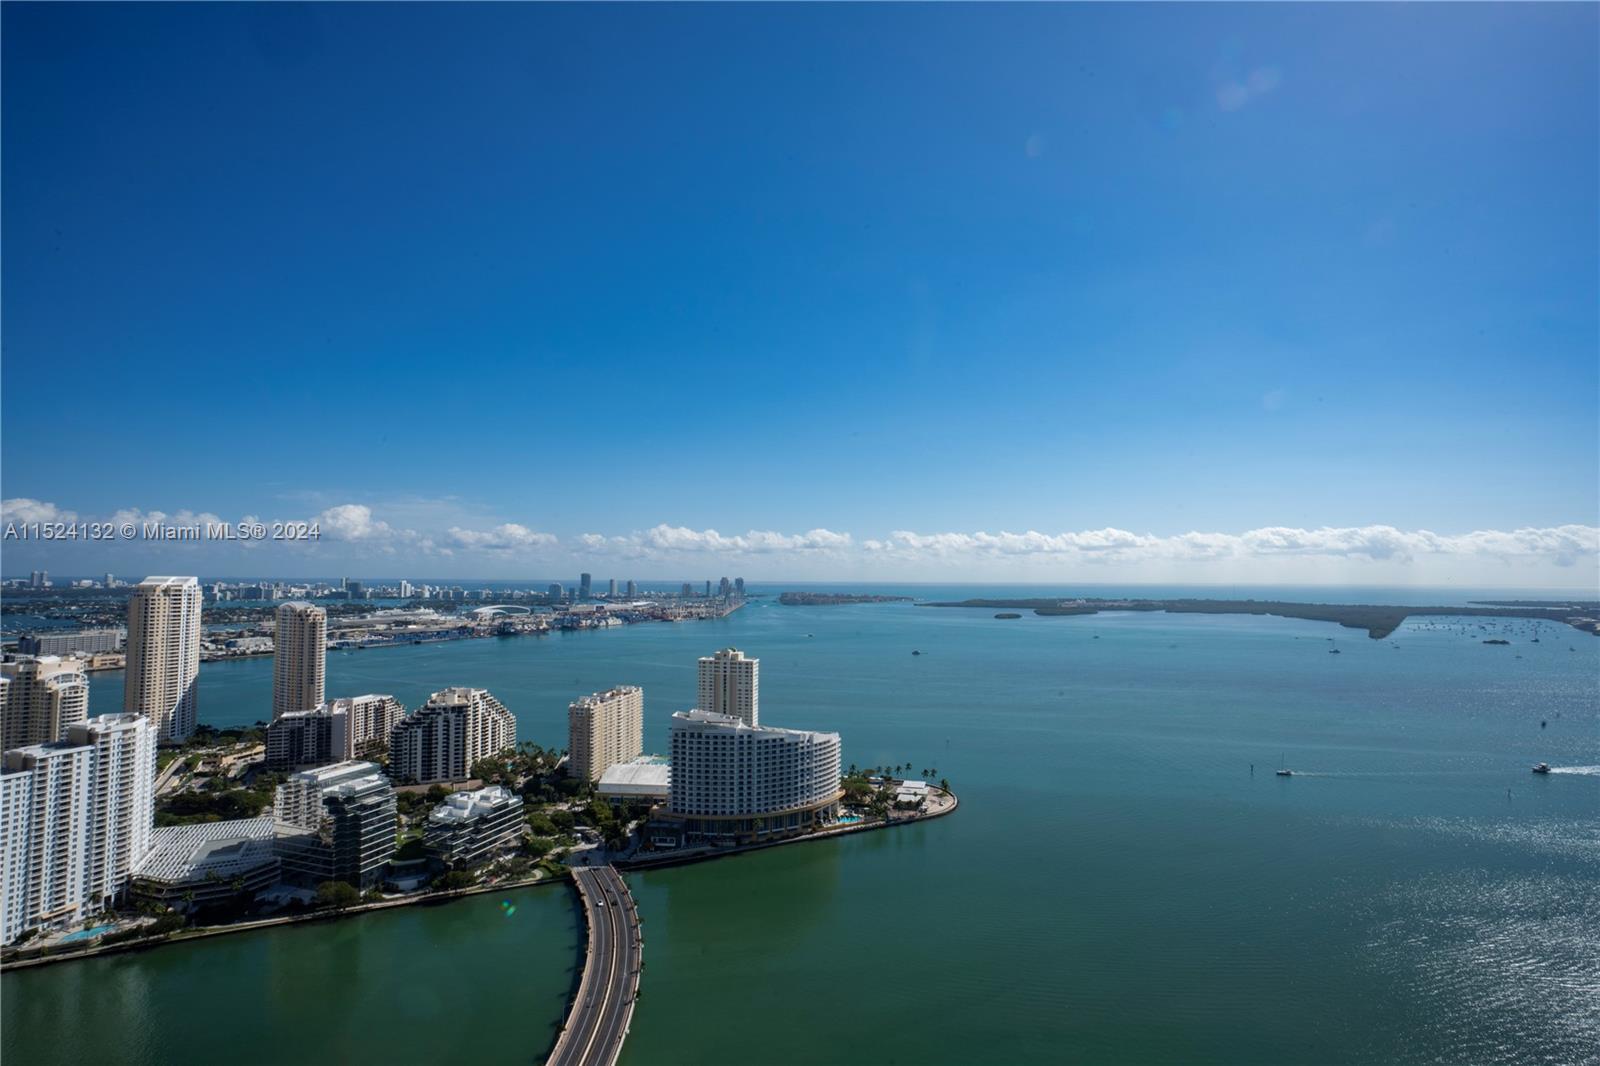 950  Brickell Bay Dr #5010 For Sale A11524132, FL